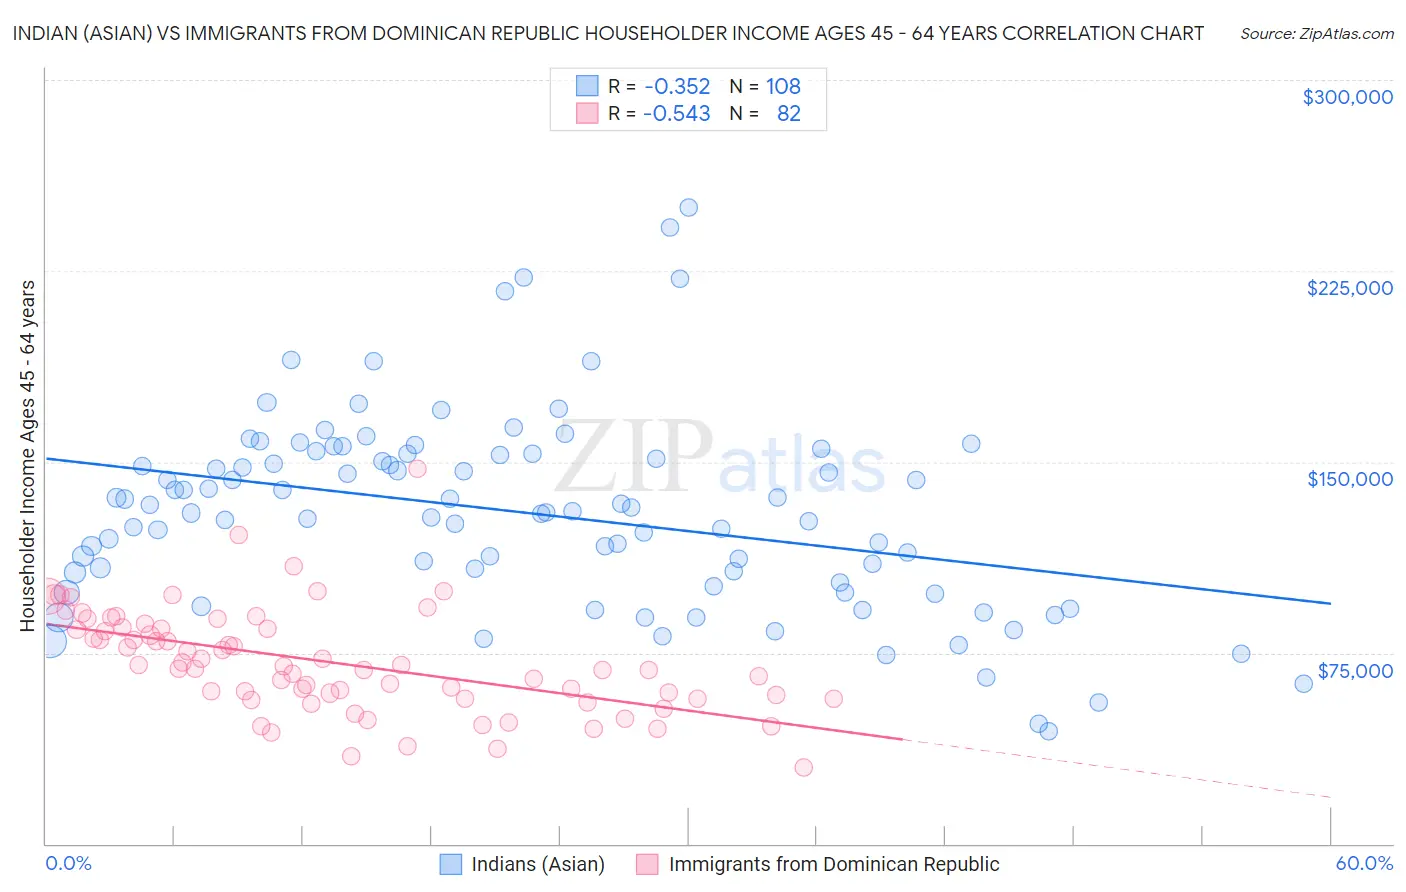 Indian (Asian) vs Immigrants from Dominican Republic Householder Income Ages 45 - 64 years